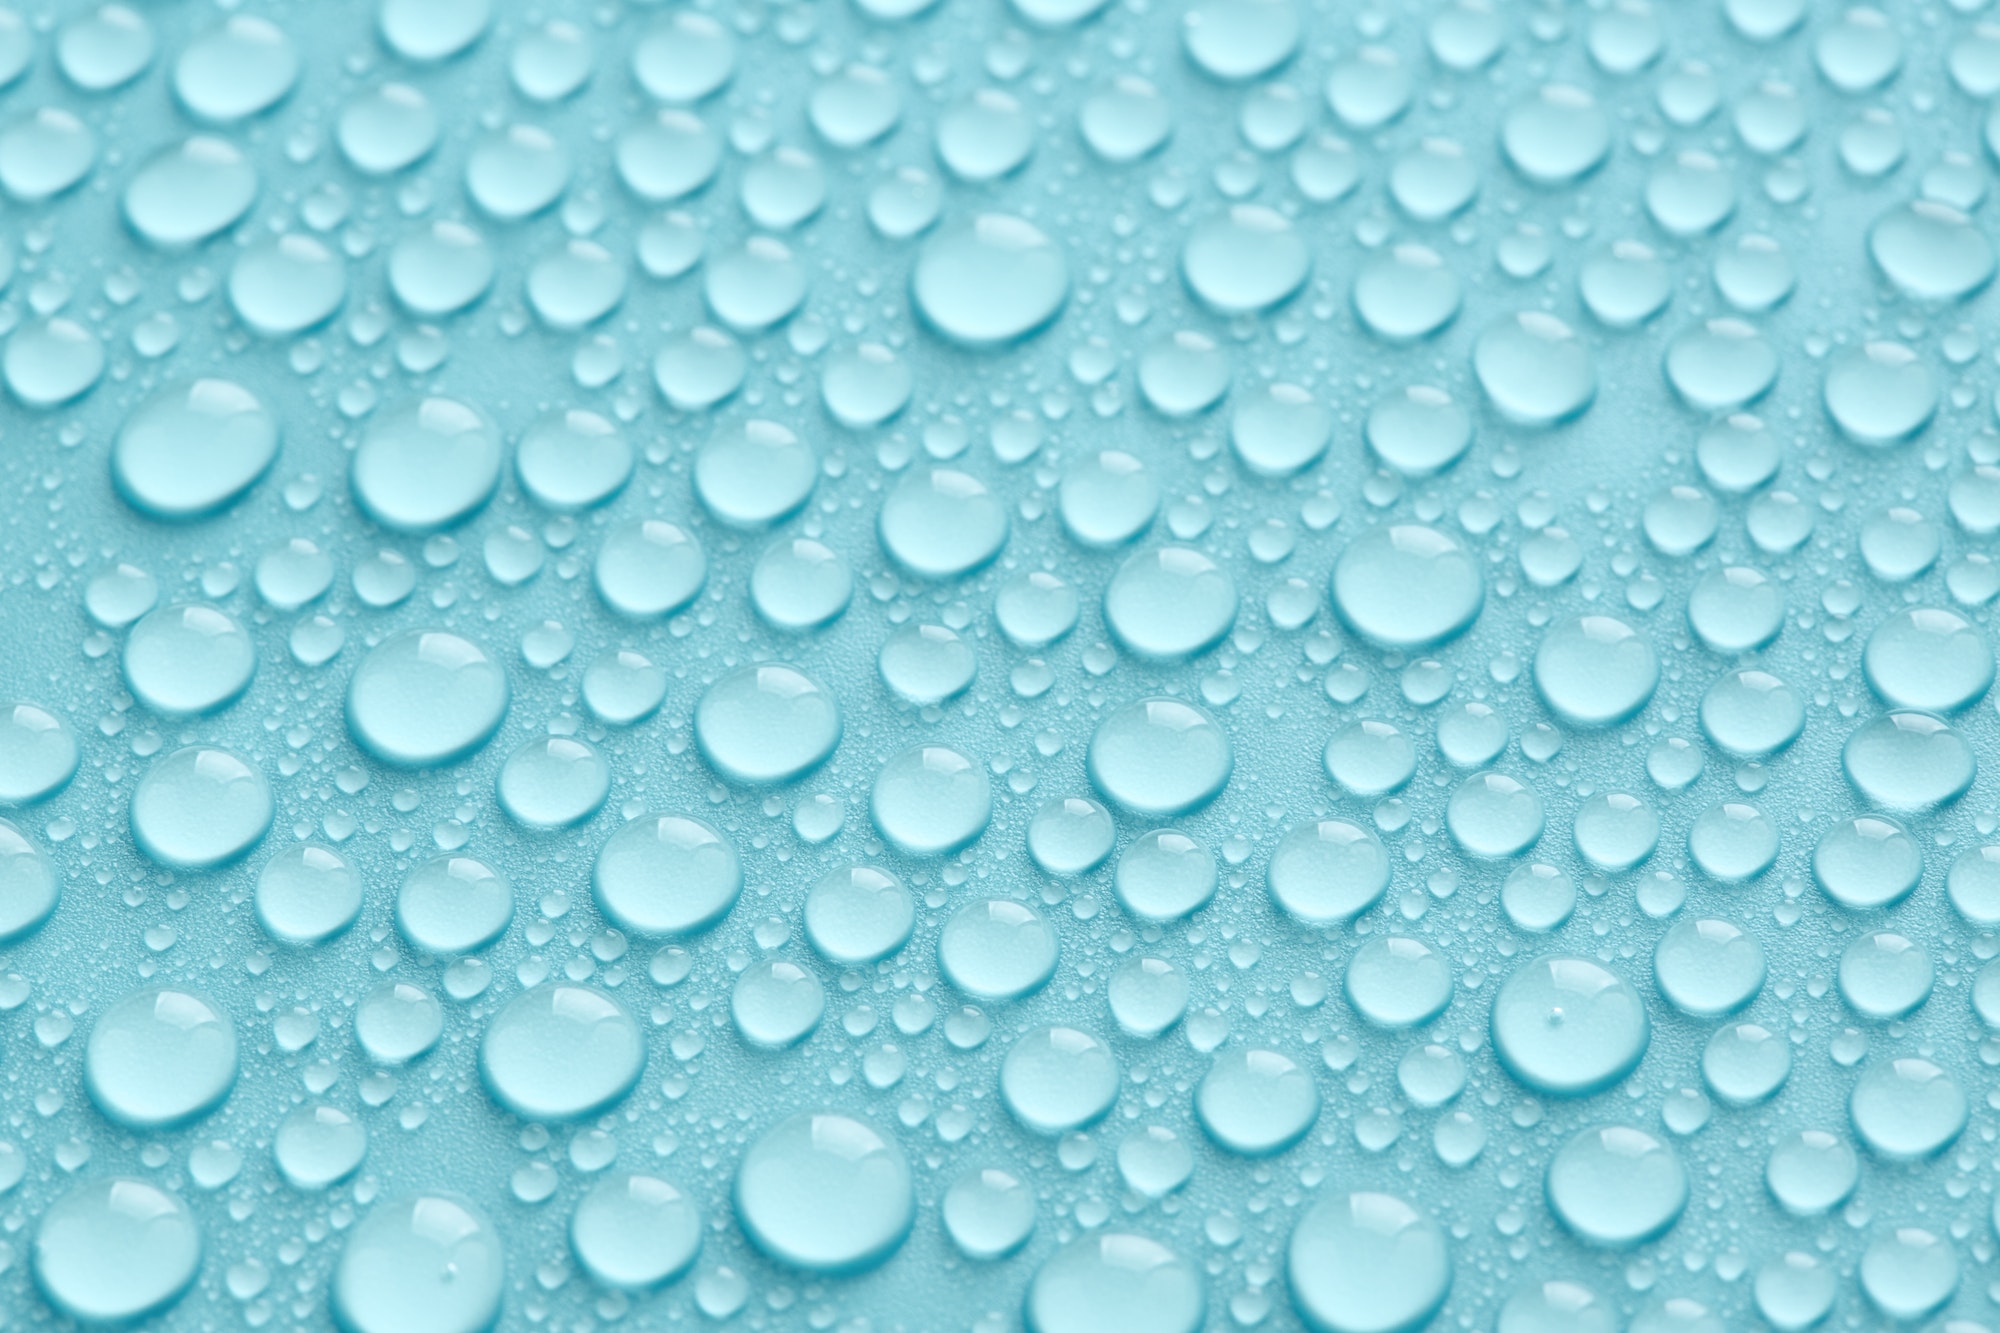 Pure Water Drops Texture, Turquoise Droplets Background.